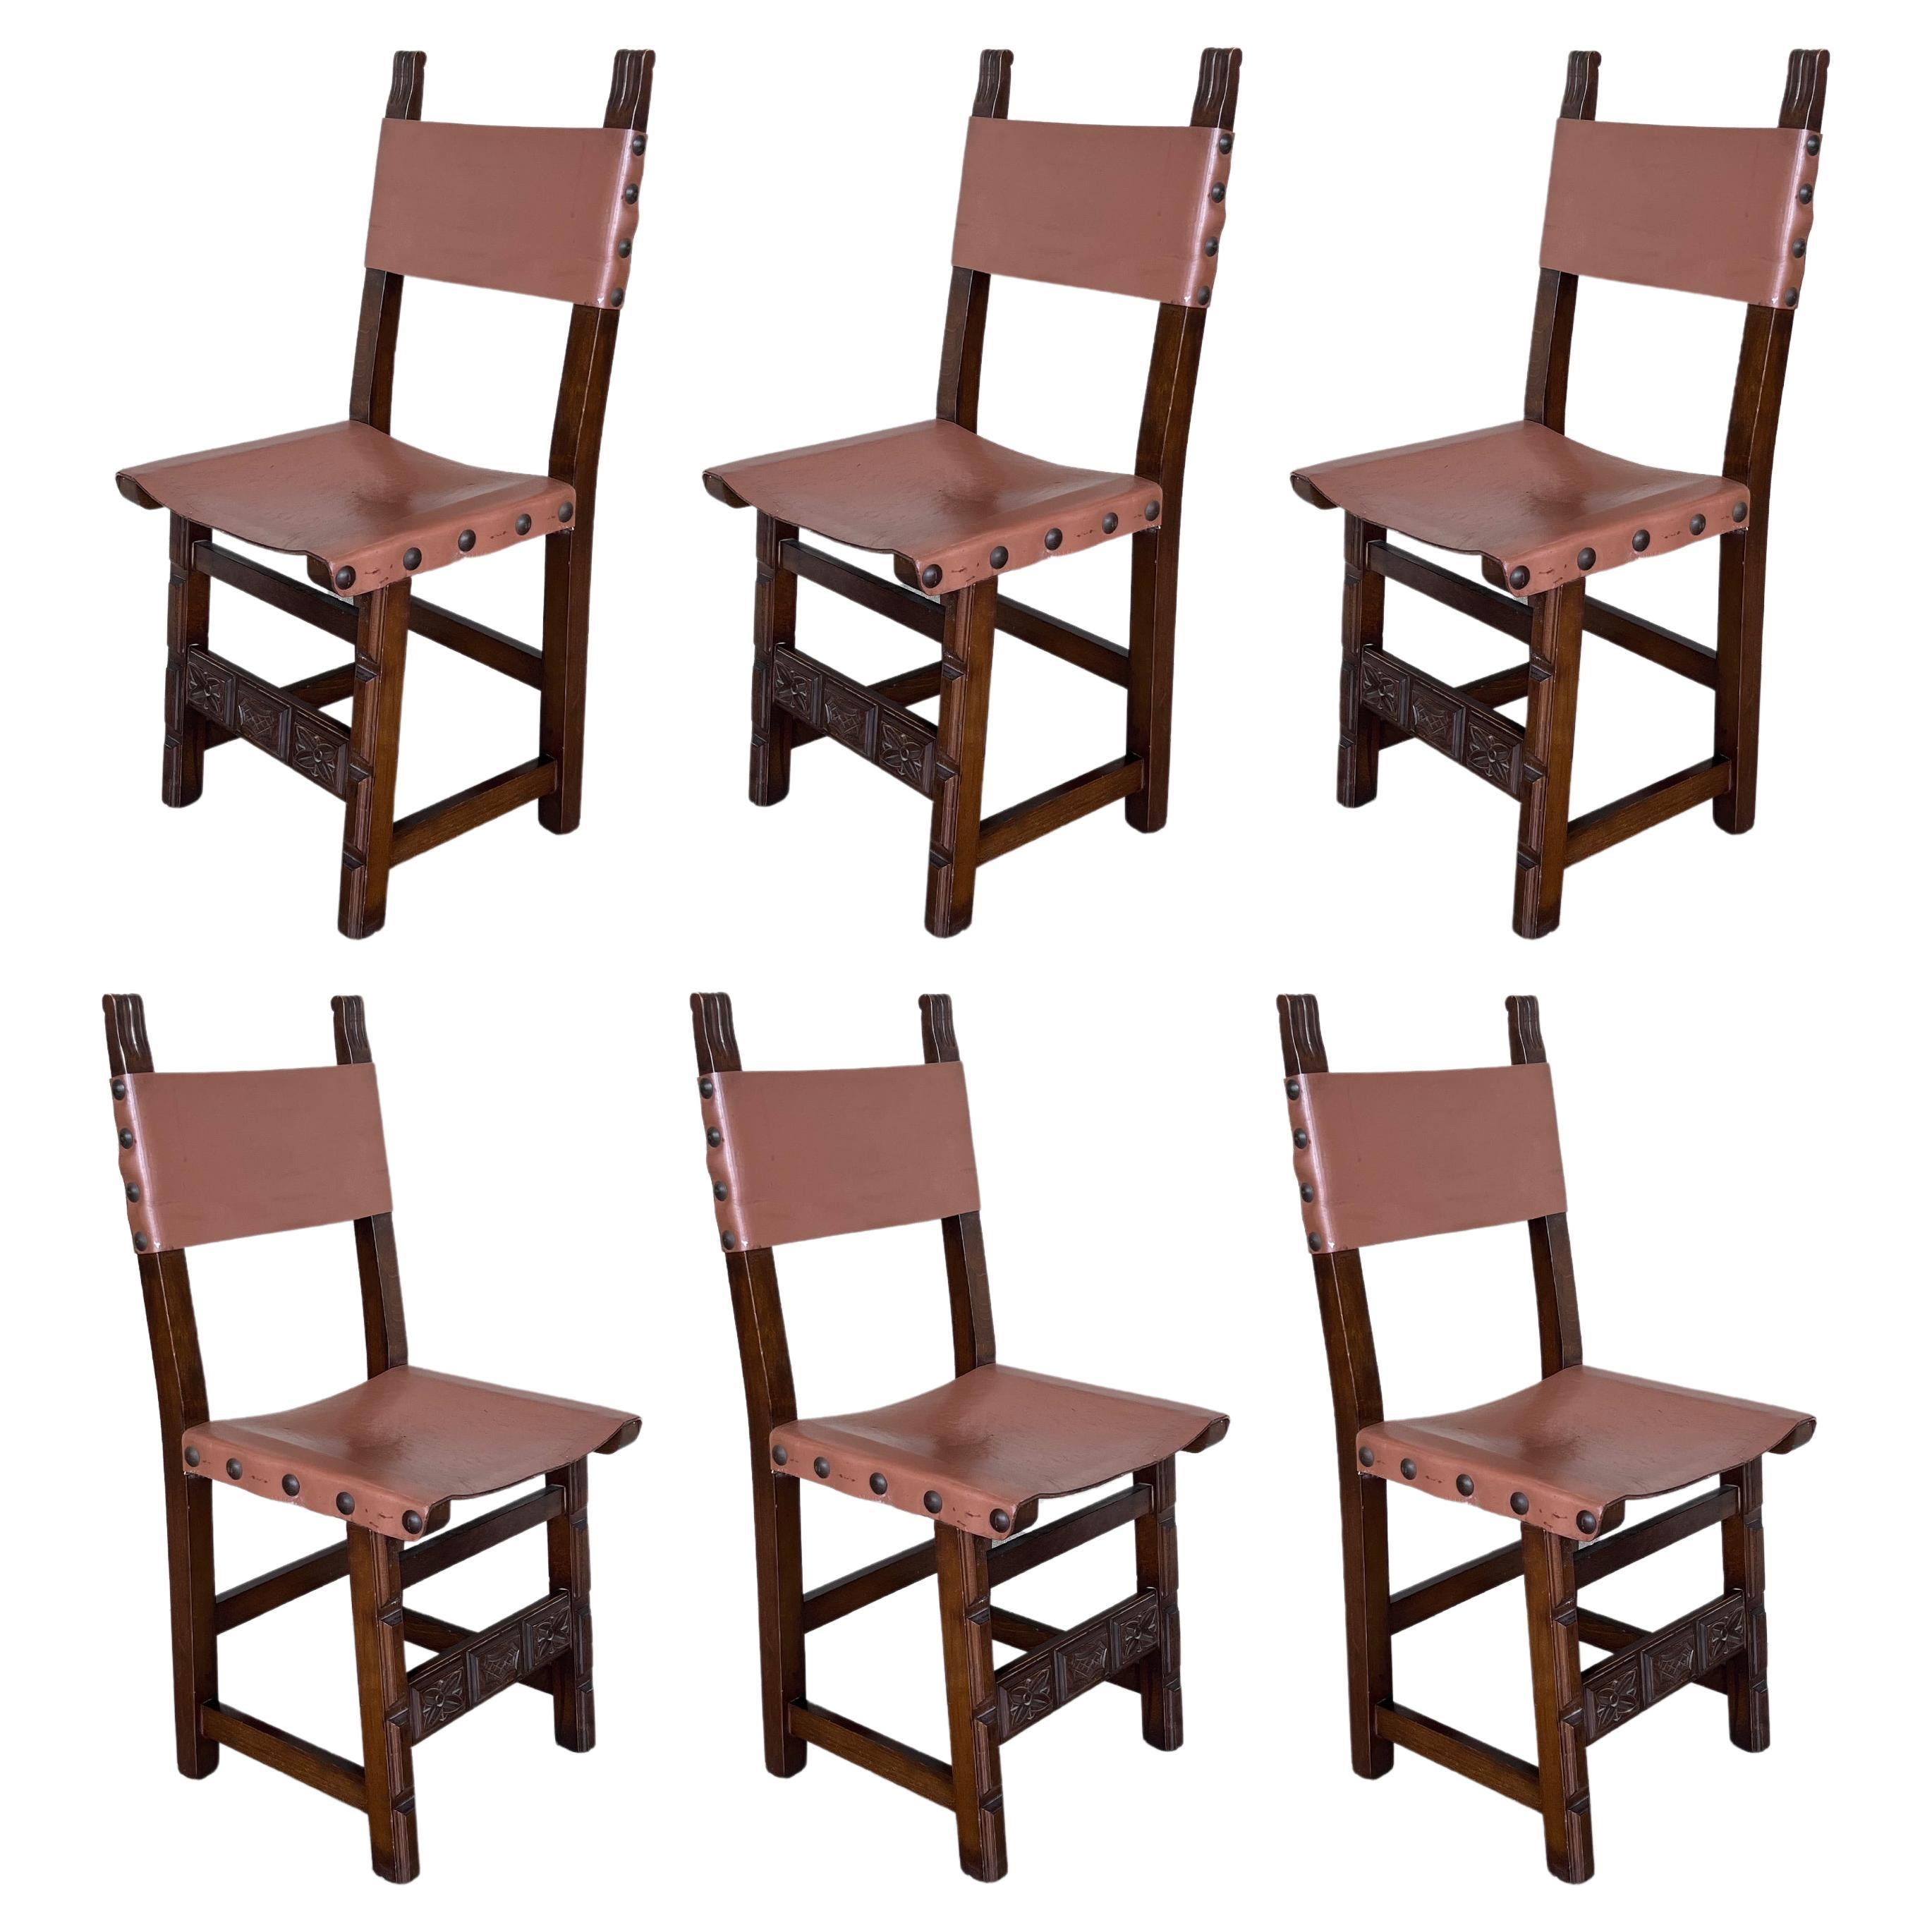 19th Set of Six Spanish Carved Chairs with Leather Seat and Back